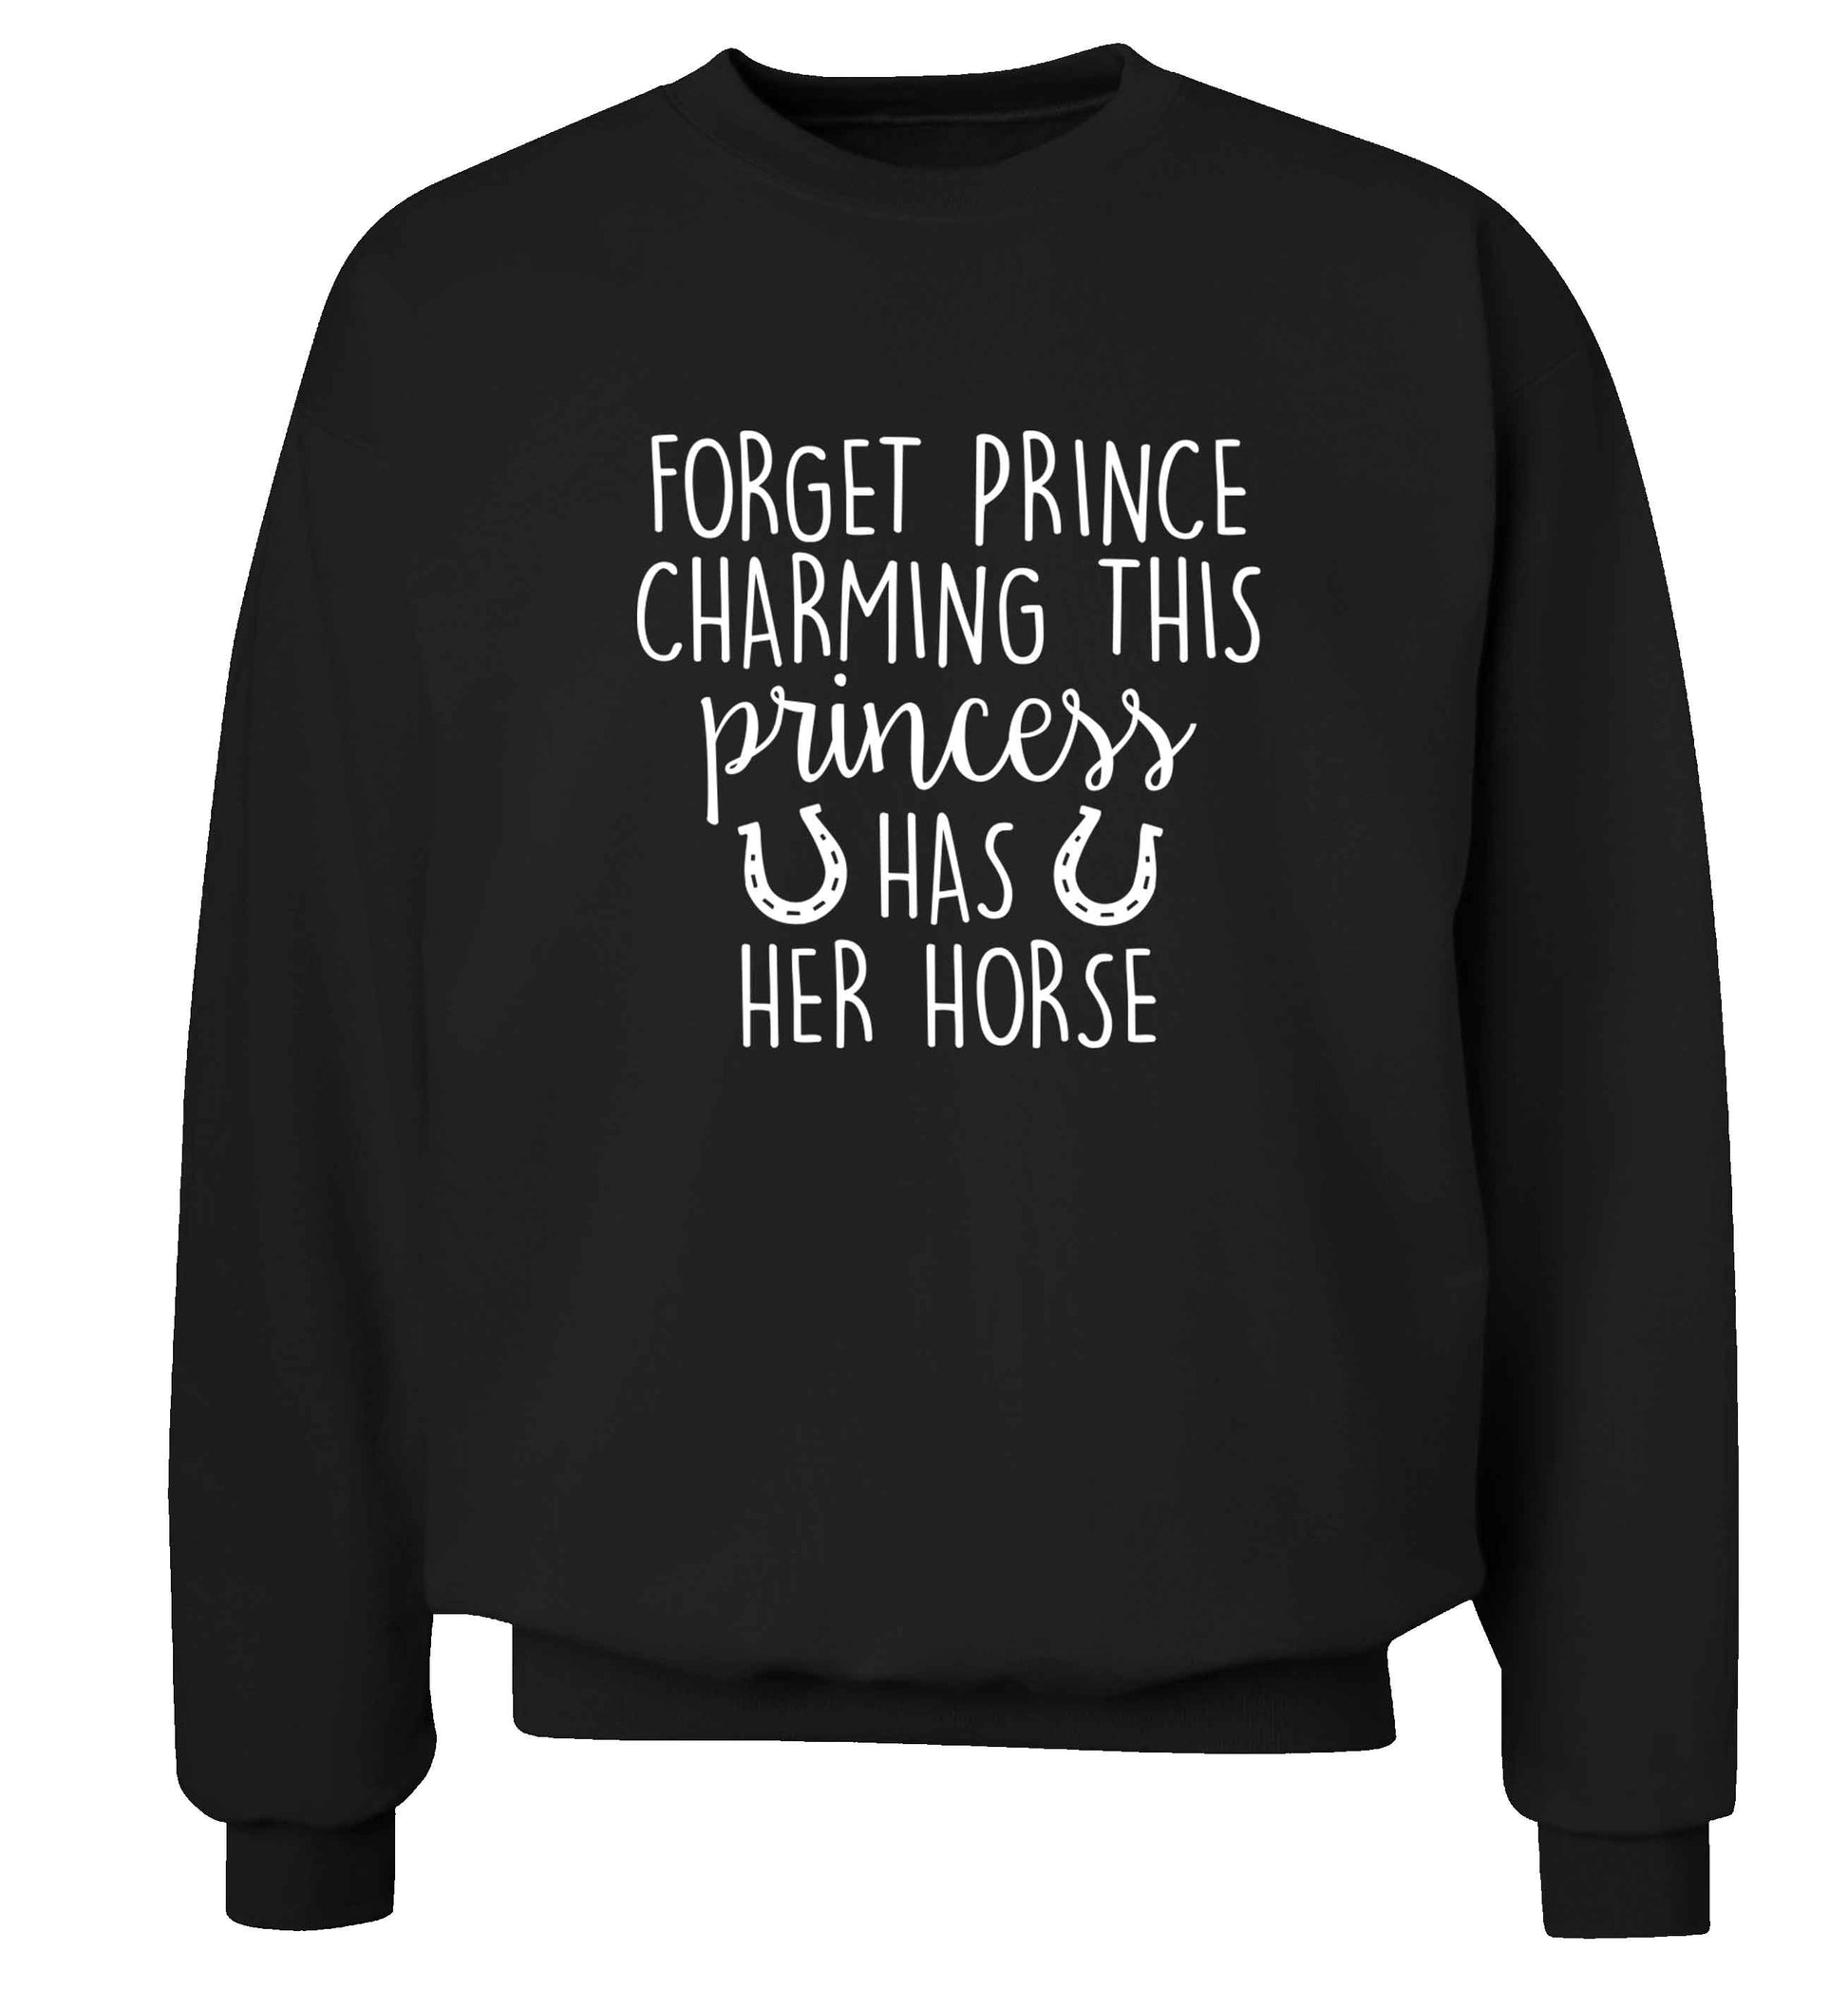 Forget prince charming this princess has her horse adult's unisex black sweater 2XL